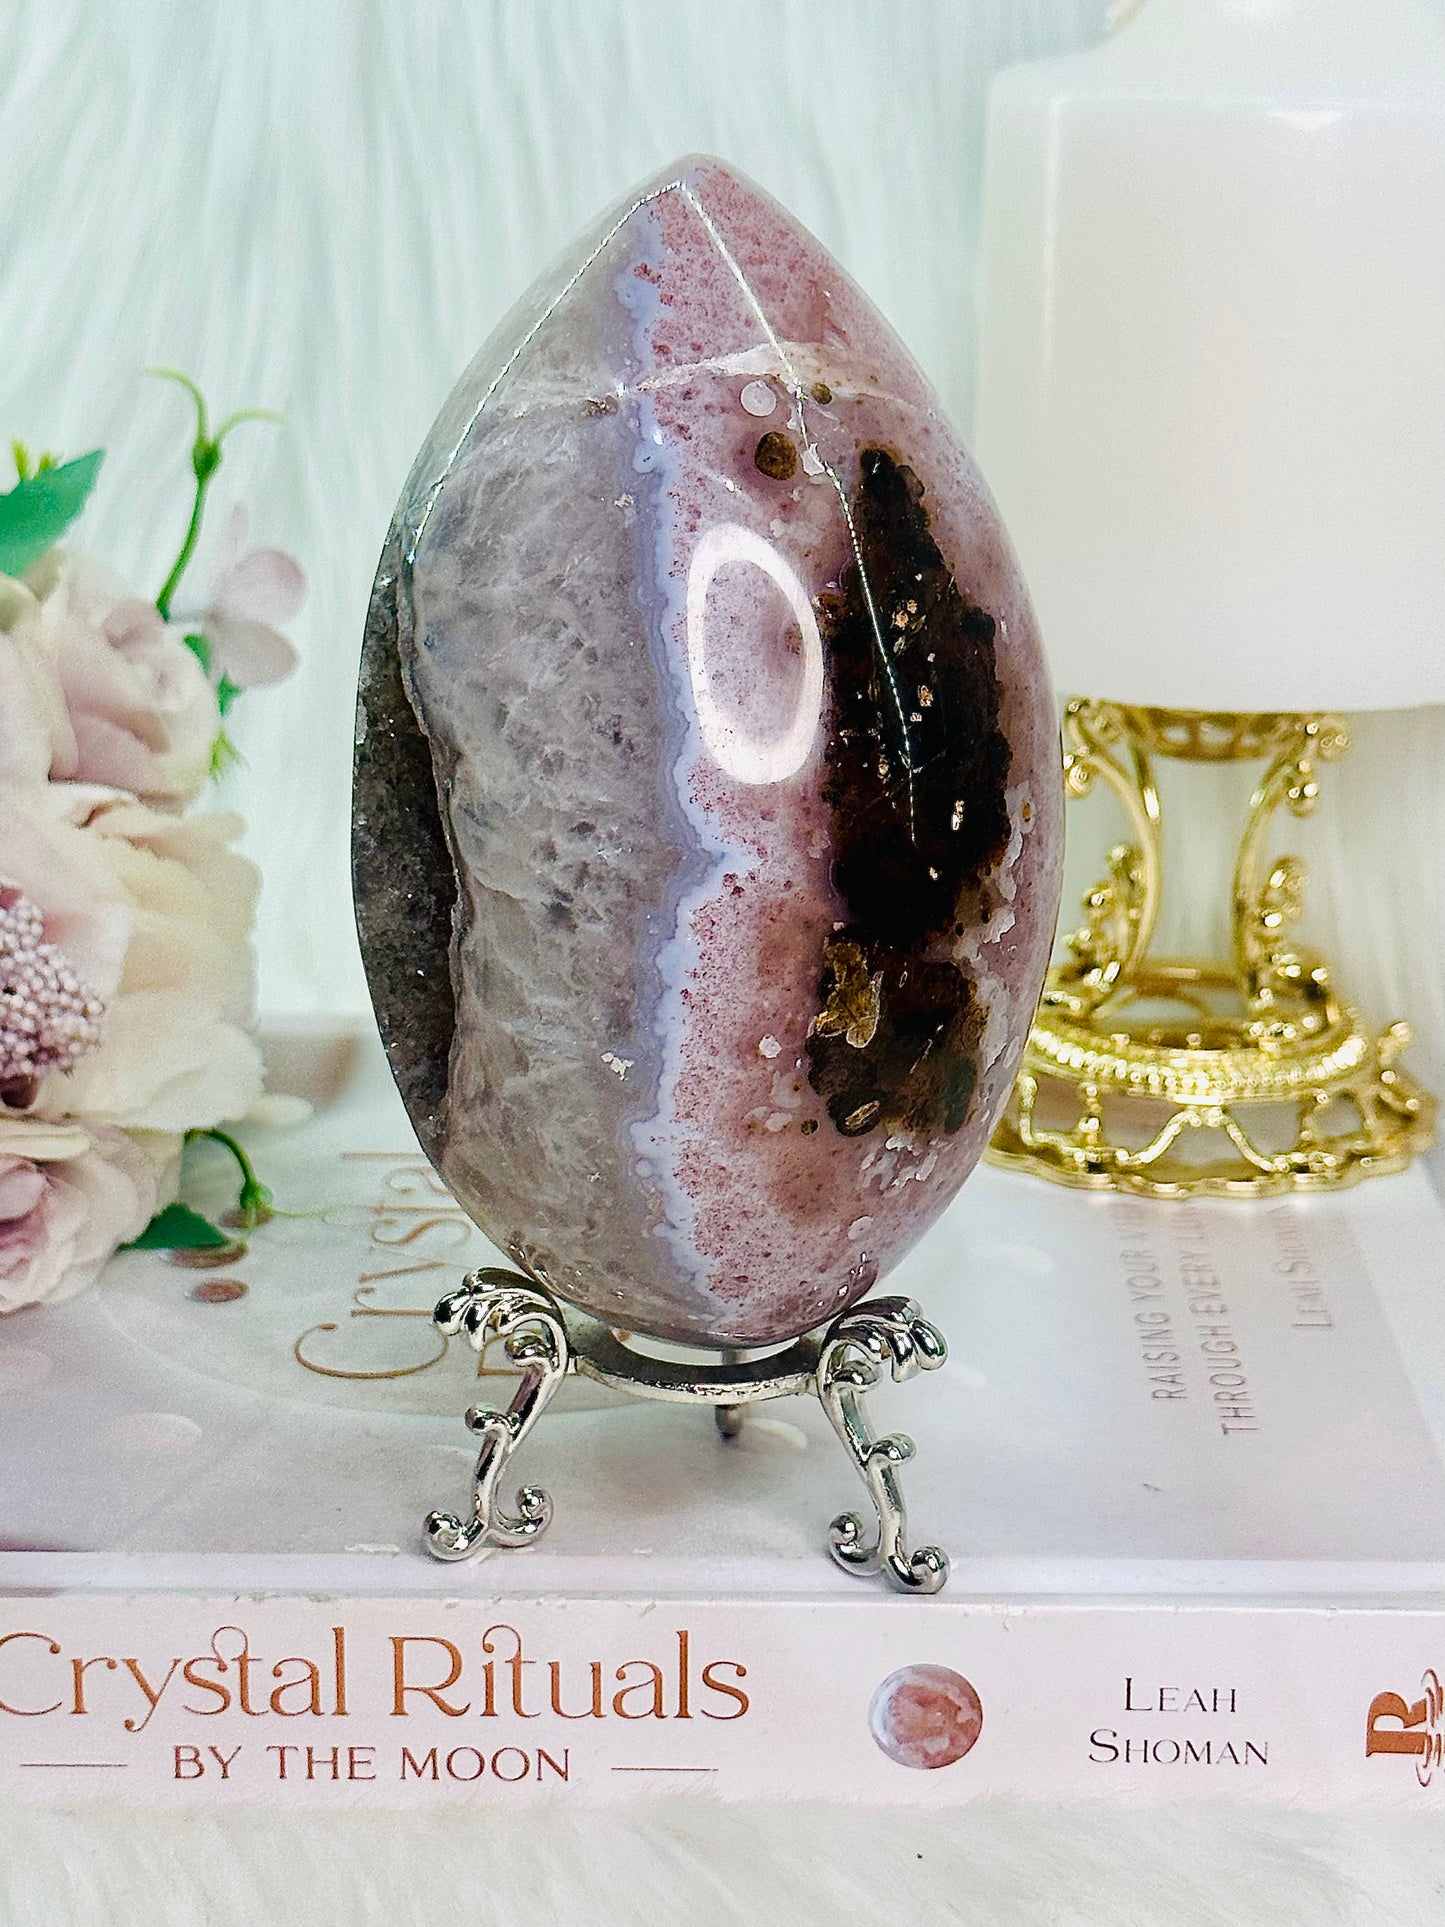 TOTALLY IN LOVE!!!!! Absolutely Divine Large 718gram Druzy Agate Carved Egg On Stand ~ An Exquisite Piece